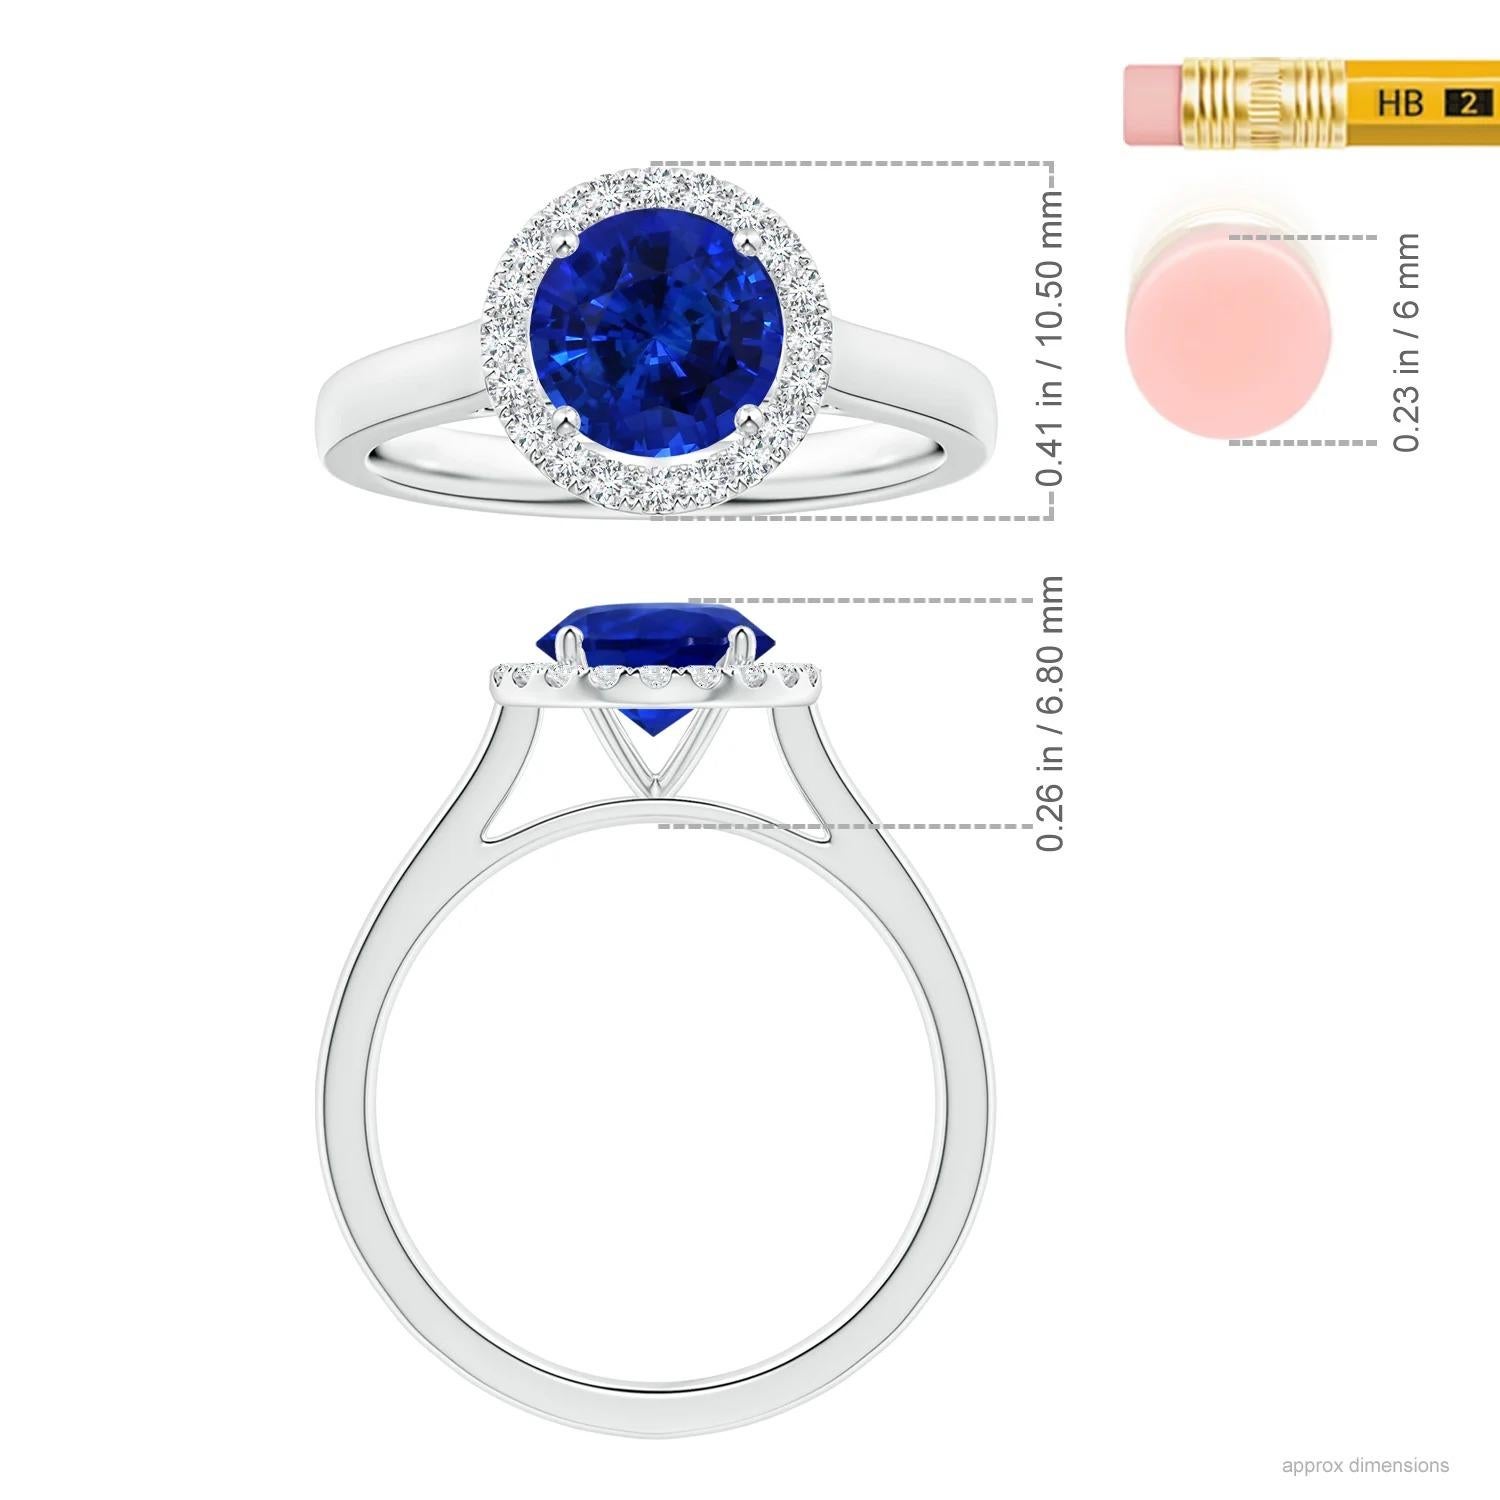 For Sale:  Angara Gia Certified Natural Round Blue Sapphire Ring in White Gold with Halo 5